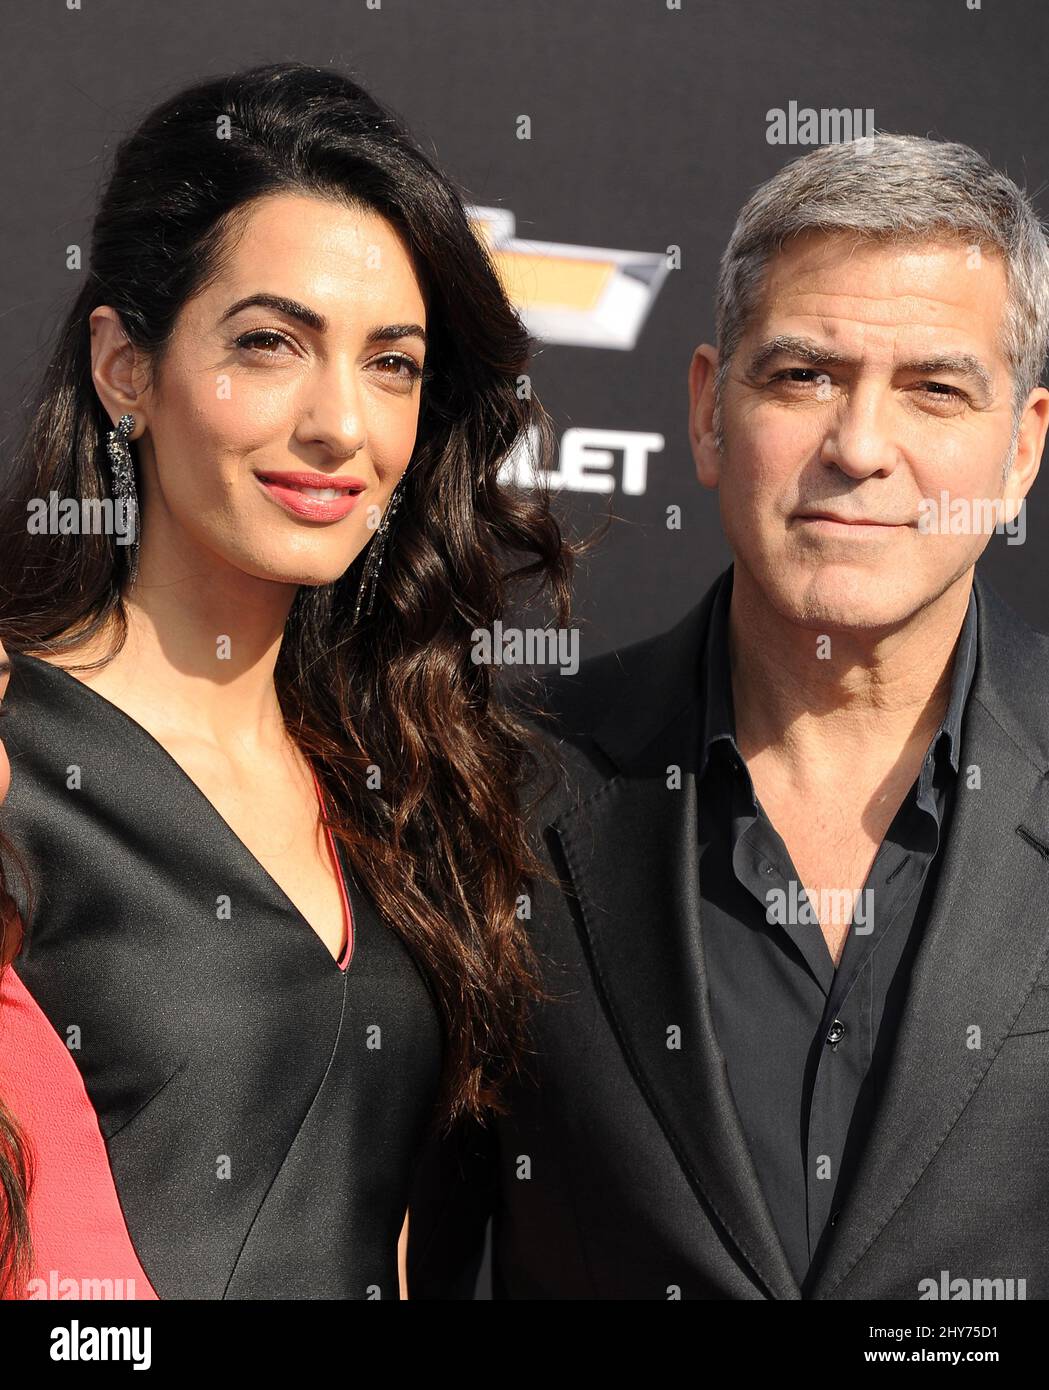 Amal Clooney, George Clooney attending the 'Tomorrowland' World Premiere held at Disneyland in Anaheim, California. Stock Photo